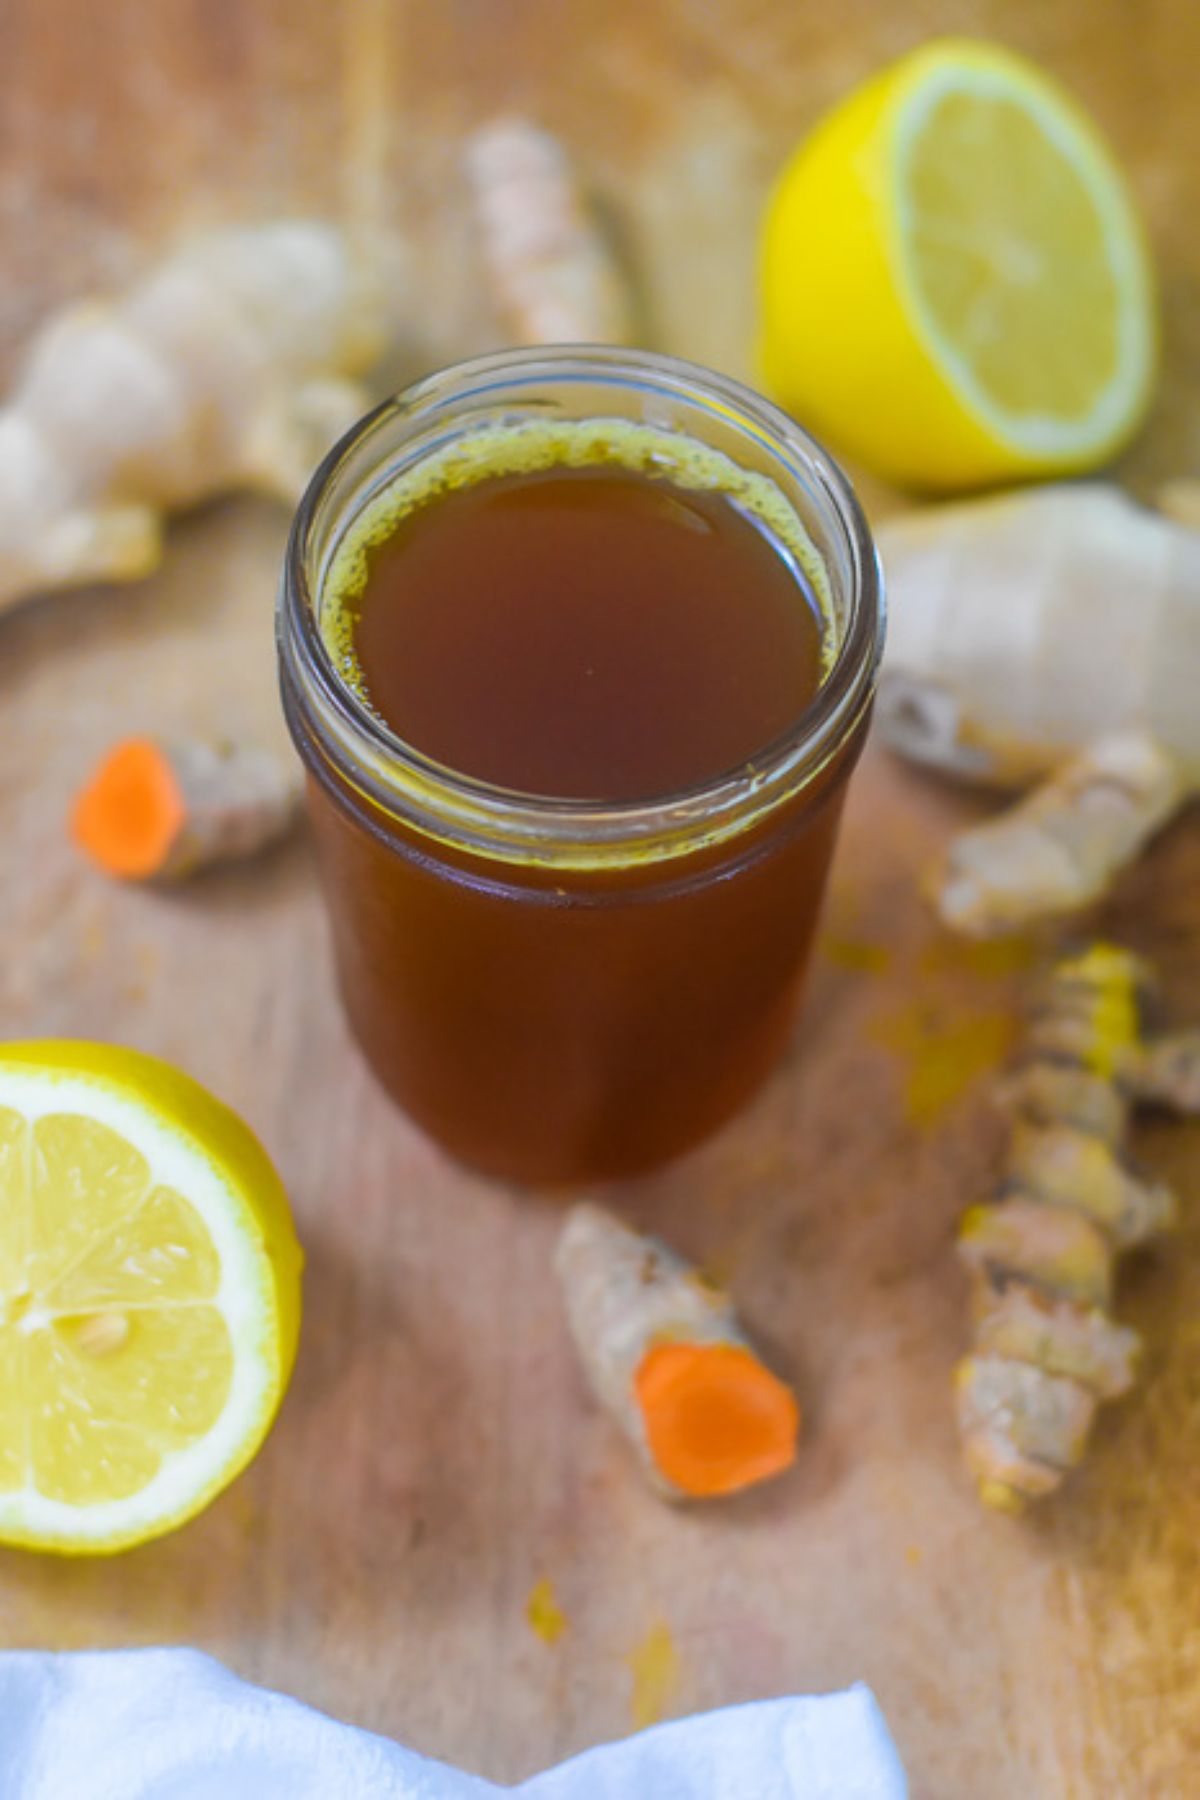 small jar of homemade ginger turmeric honey syrup infused with fresh lemon, clove, and black pepper for immune support and antioxidant supplementation.